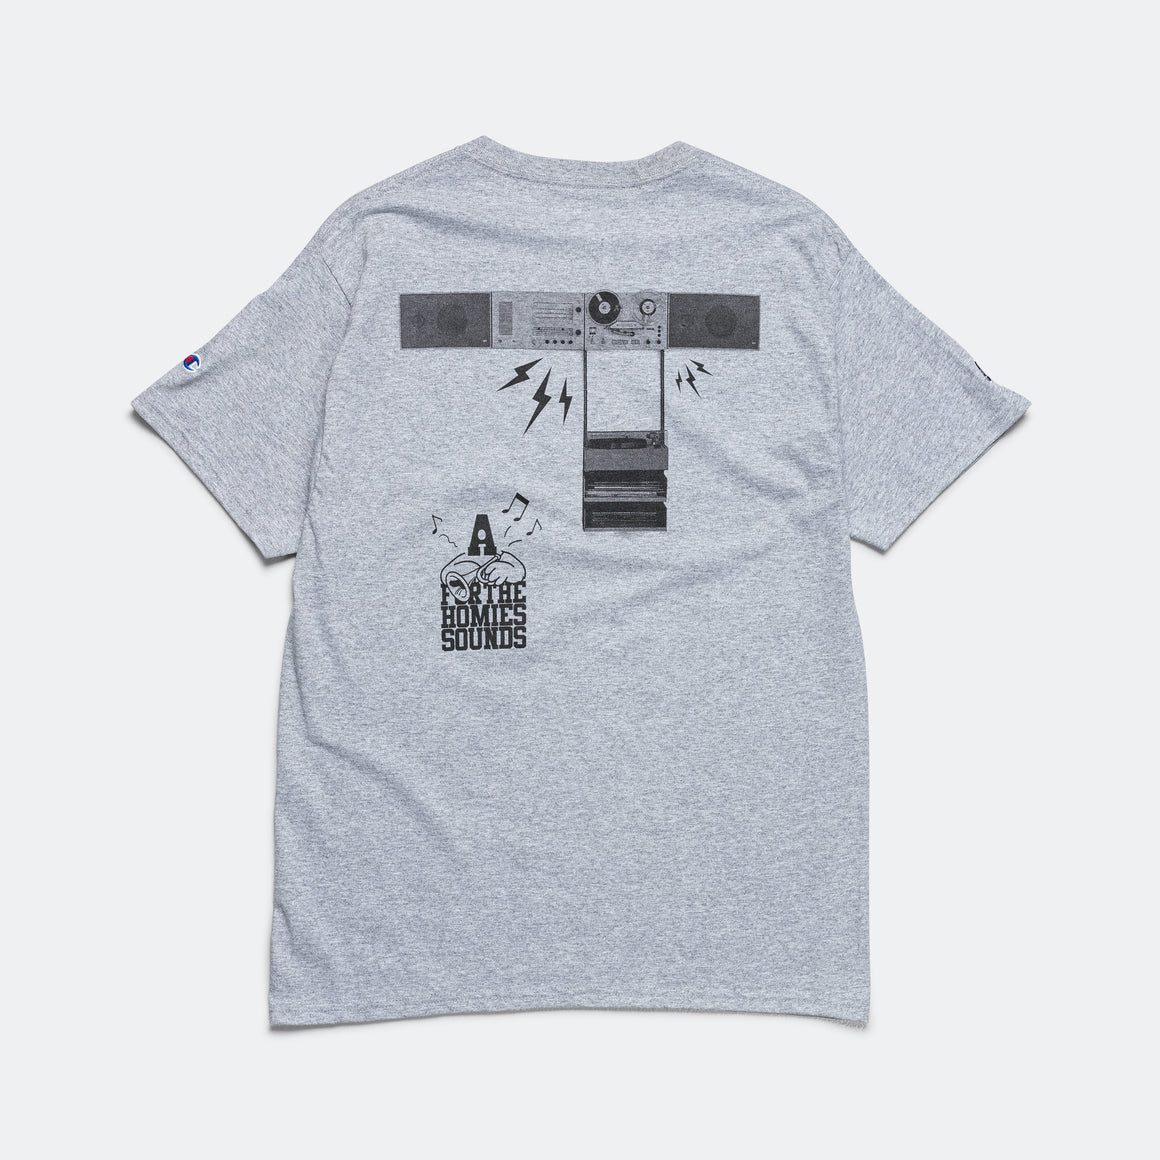 For The Homies - SOUND SYSTEM T-Shirt - Athletic Grey - UP THERE